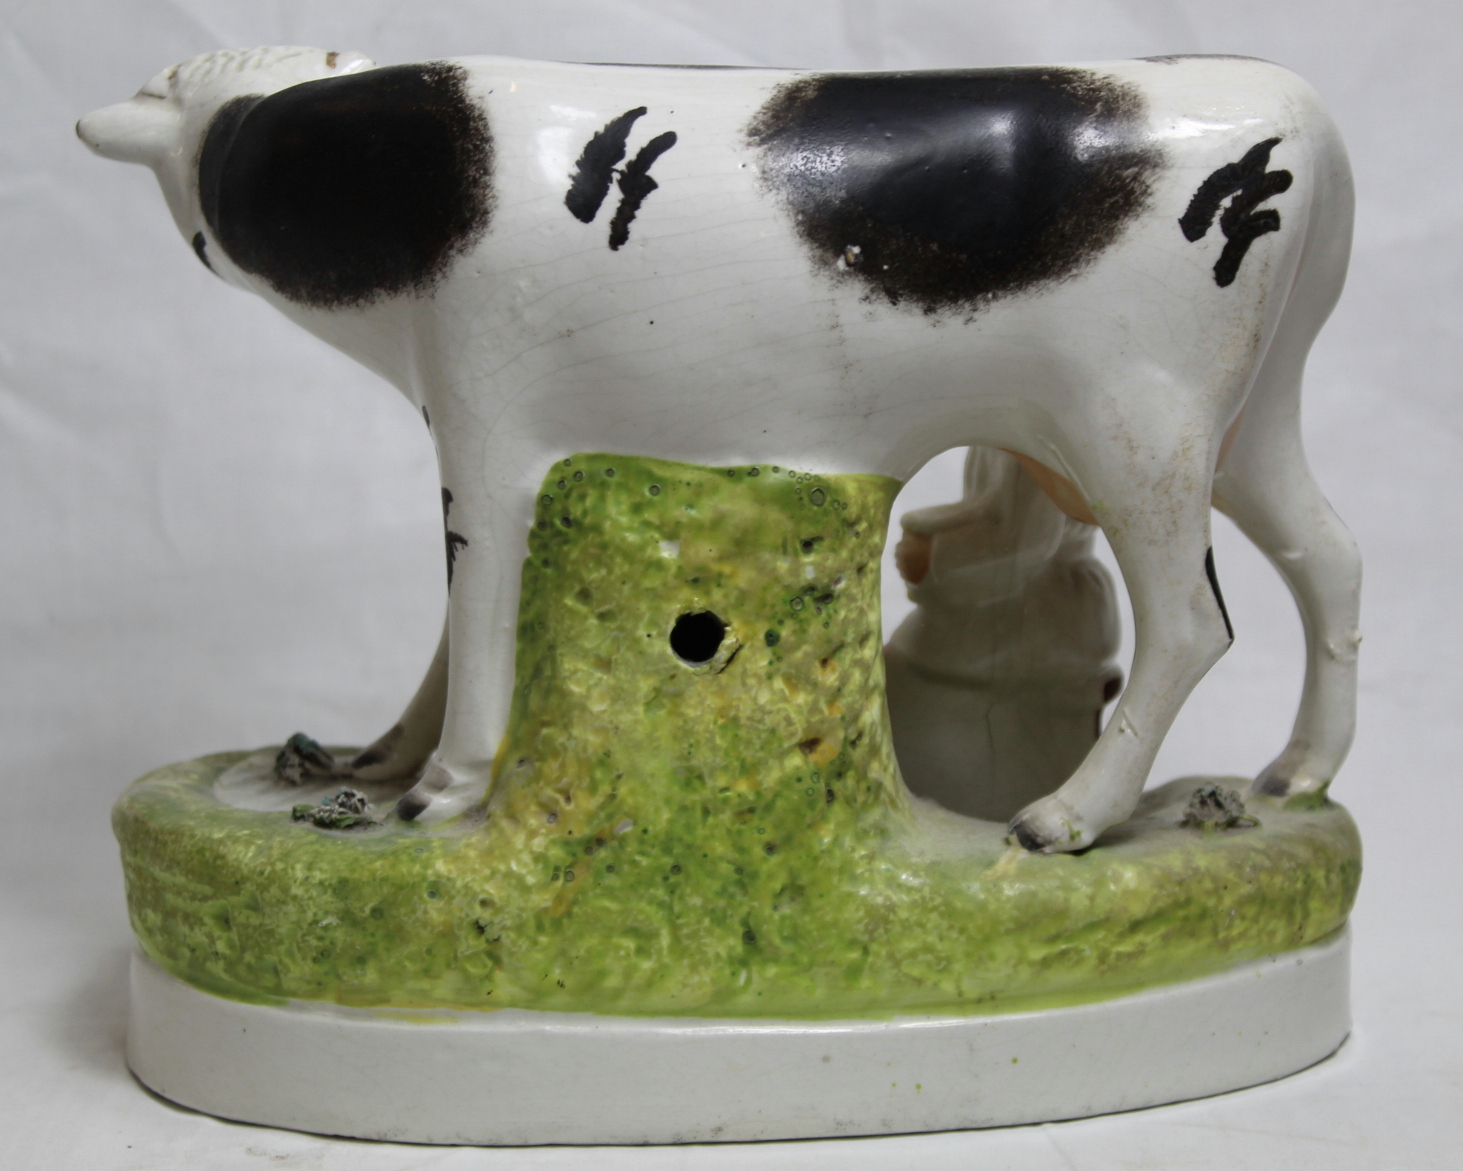 19th century Staffordshire pottery figure of a red and white cow and calf, on naturalistic oval - Image 6 of 7